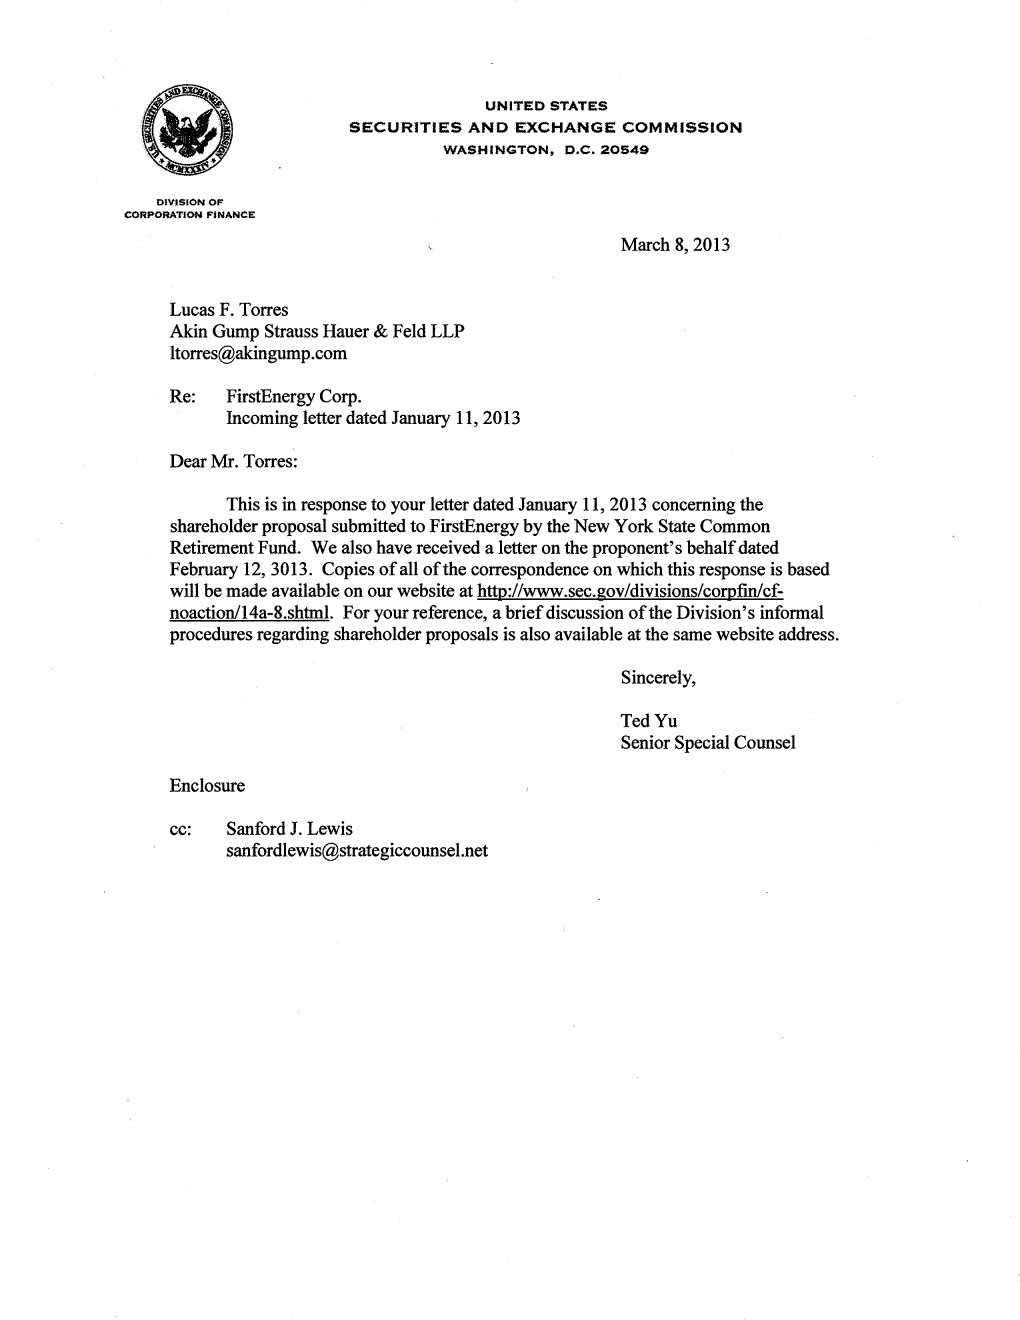 Firstenergy Corp. Incoming Letter Dated January 11, 2013